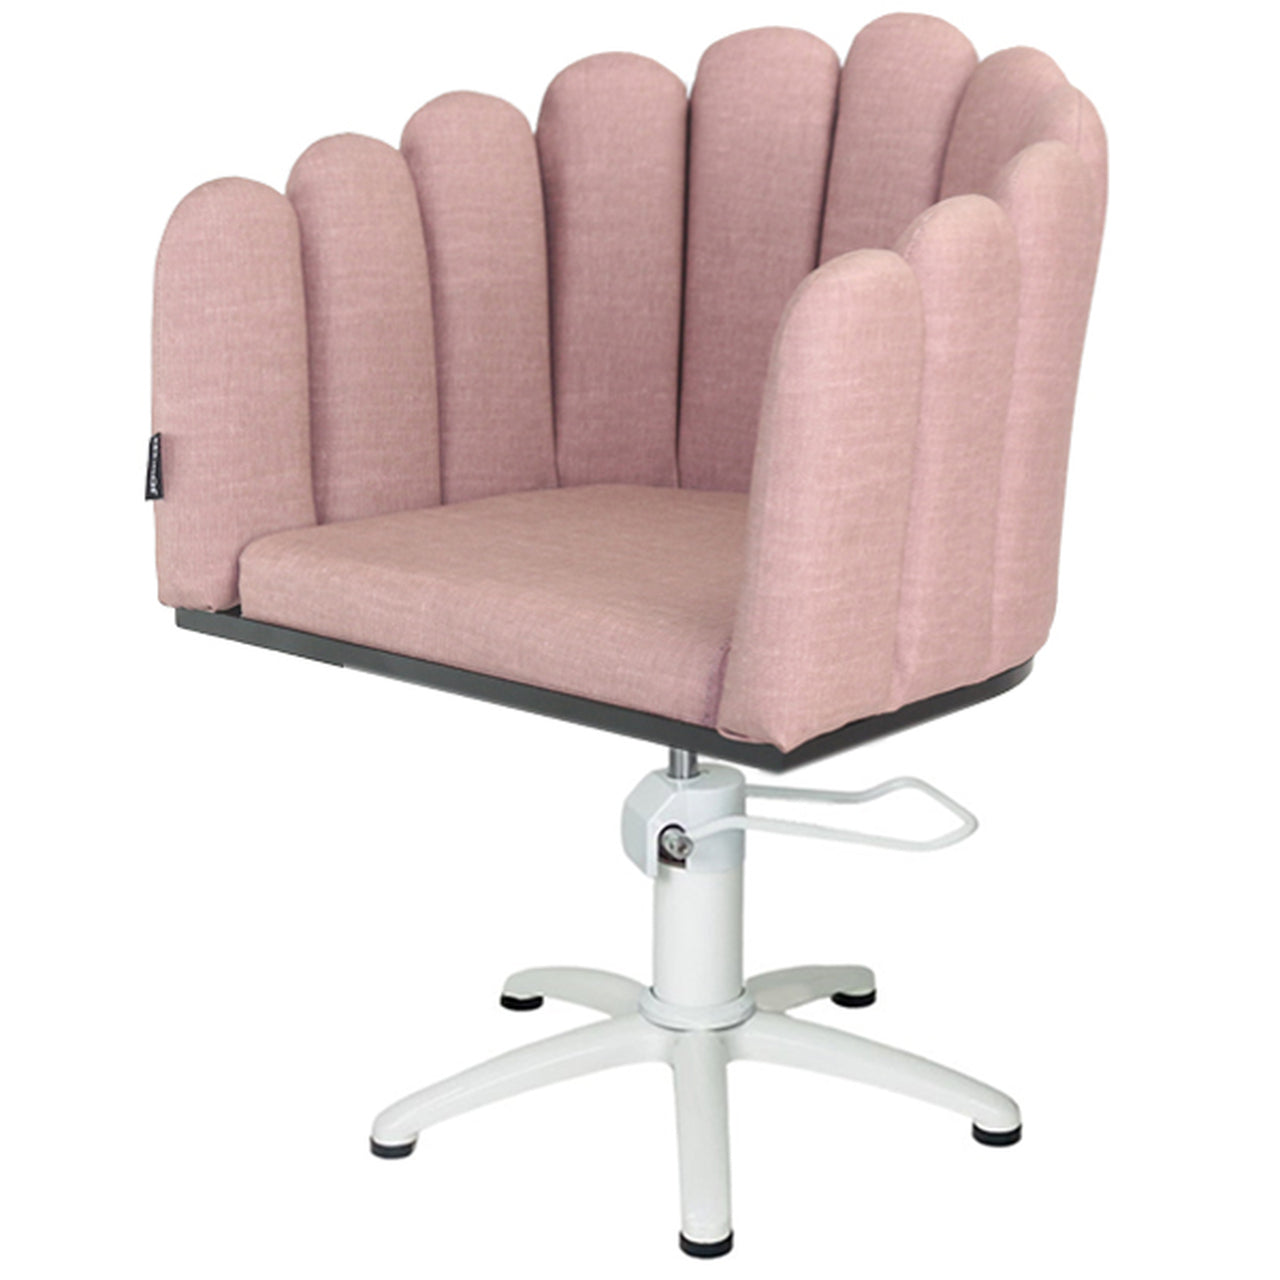 Penelope - WHITE 5 Star Hydraulic Dusty Pink Upholstery